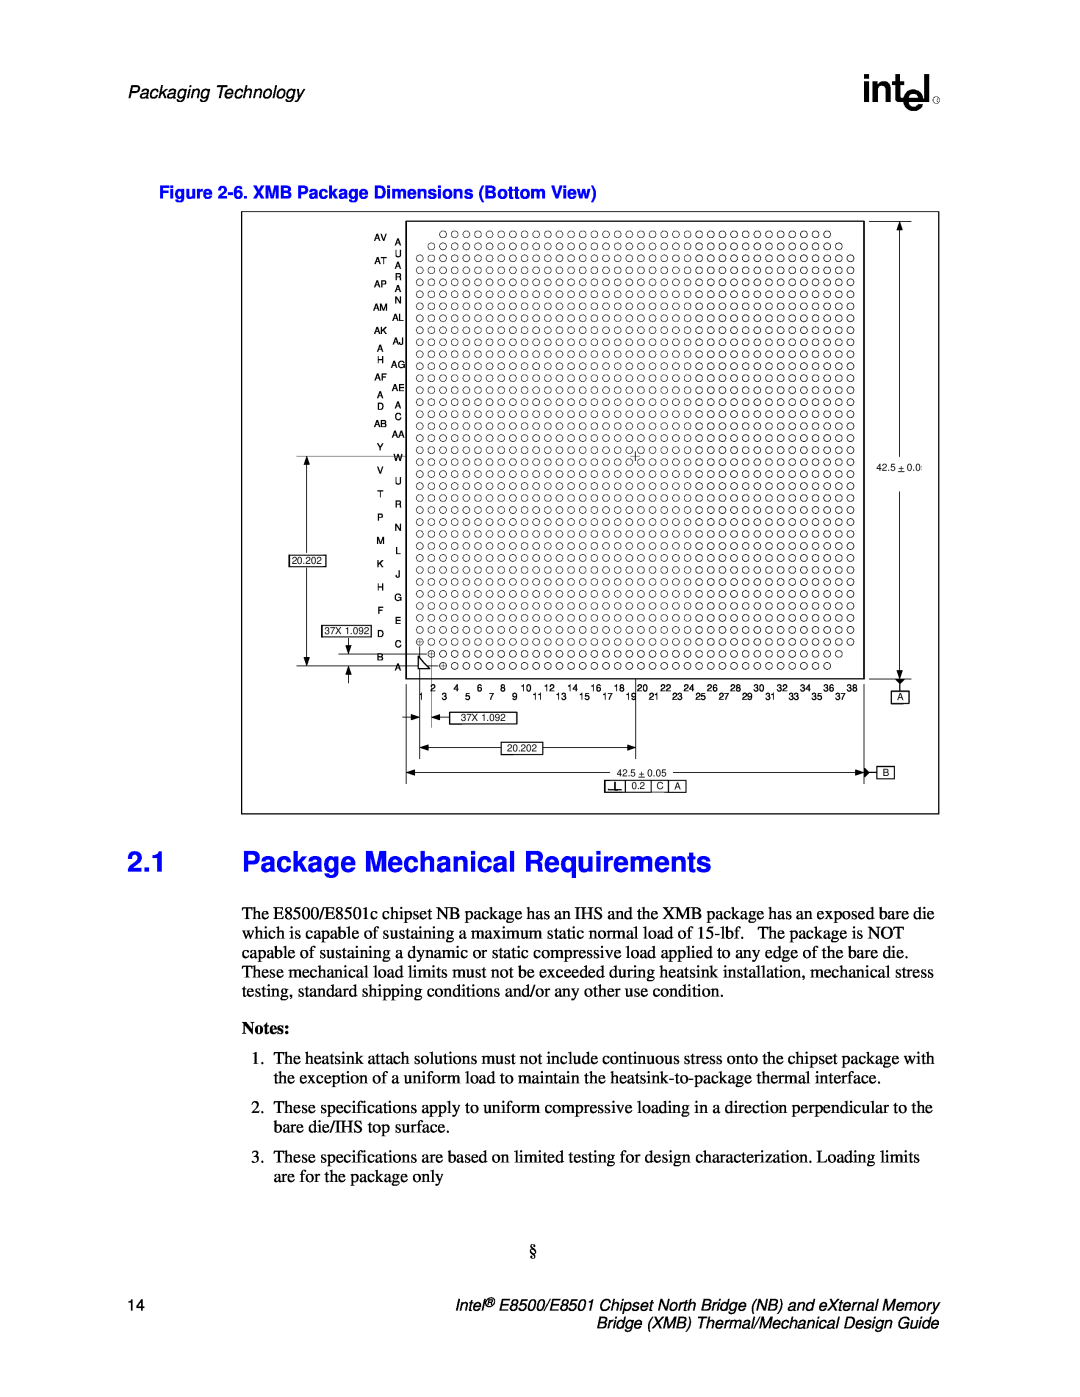 Intel E8501 manual 2.1Package Mechanical Requirements, Packaging Technology, 6.XMB Package Dimensions Bottom View, Notes 